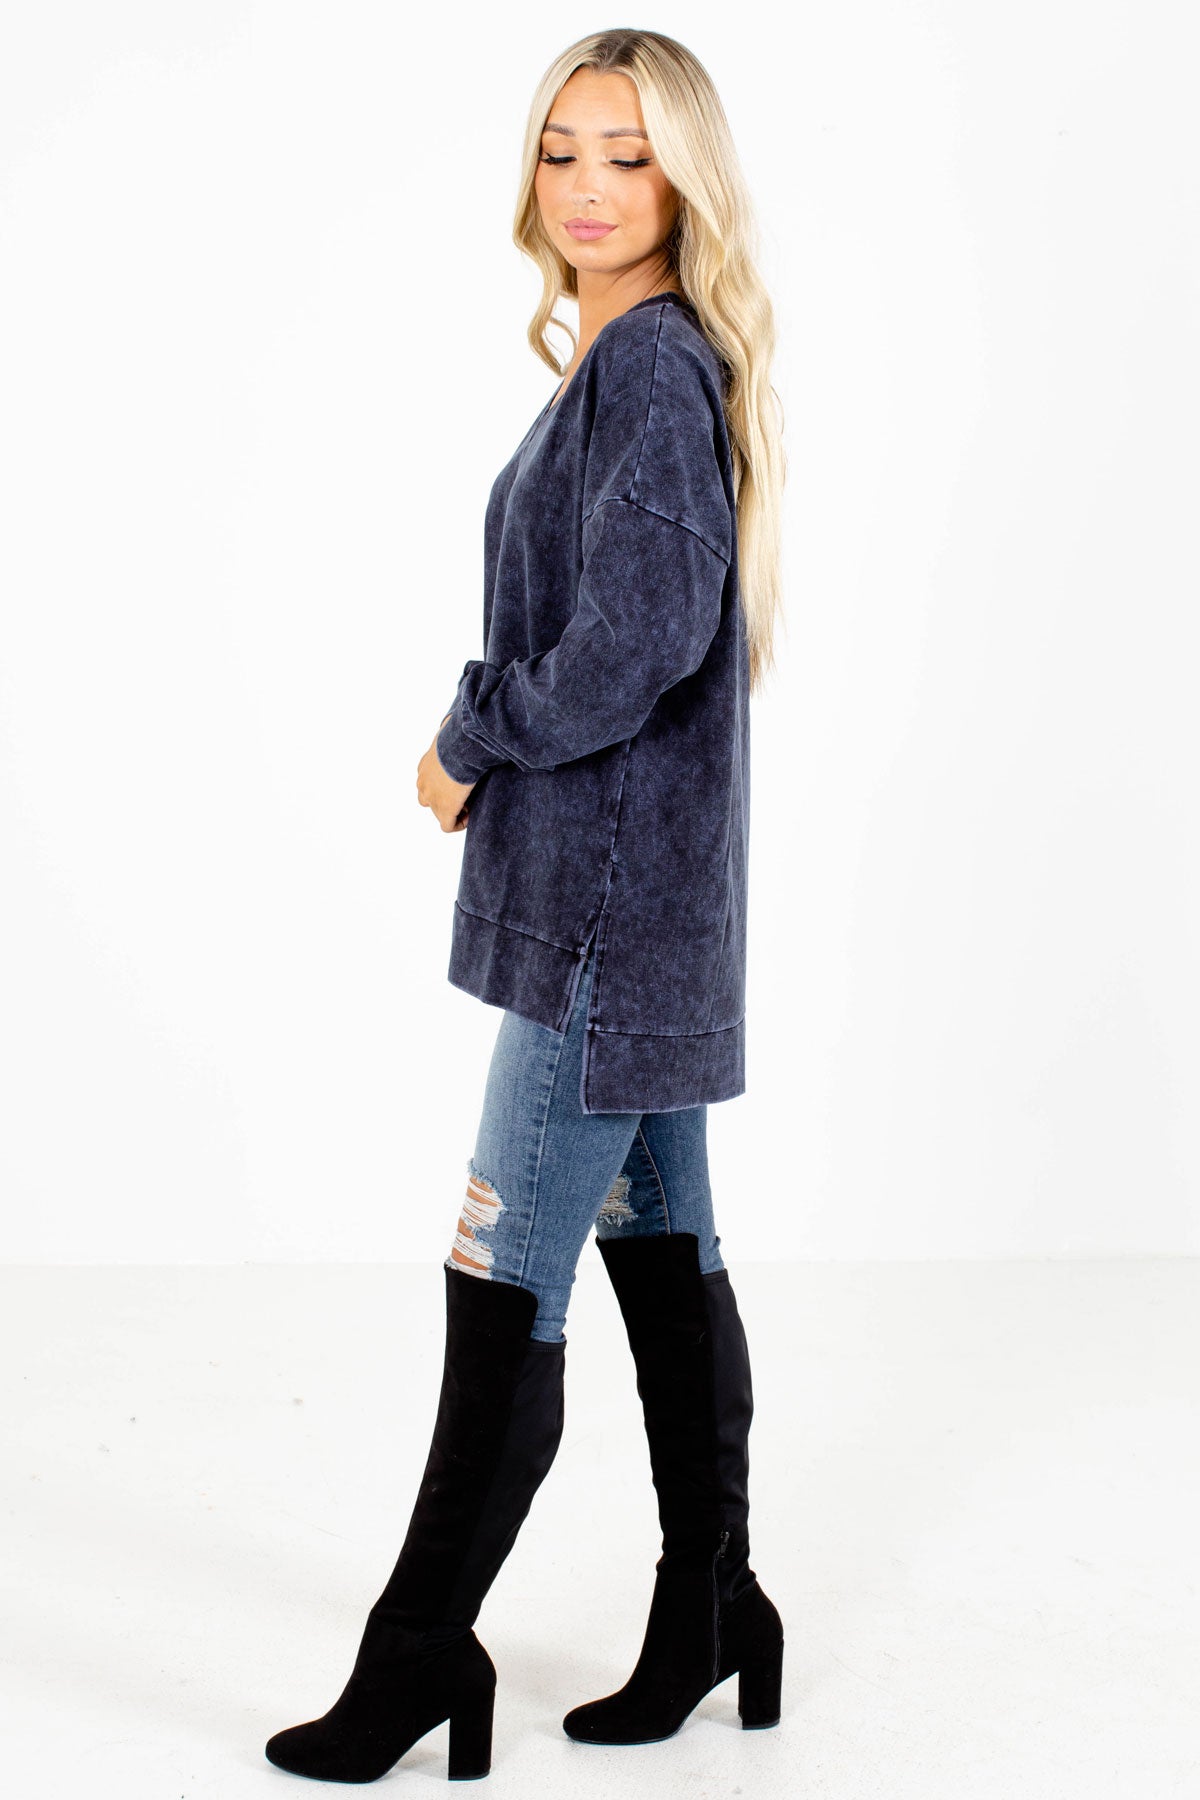 Women's Navy Fall and Winter Boutique Clothing